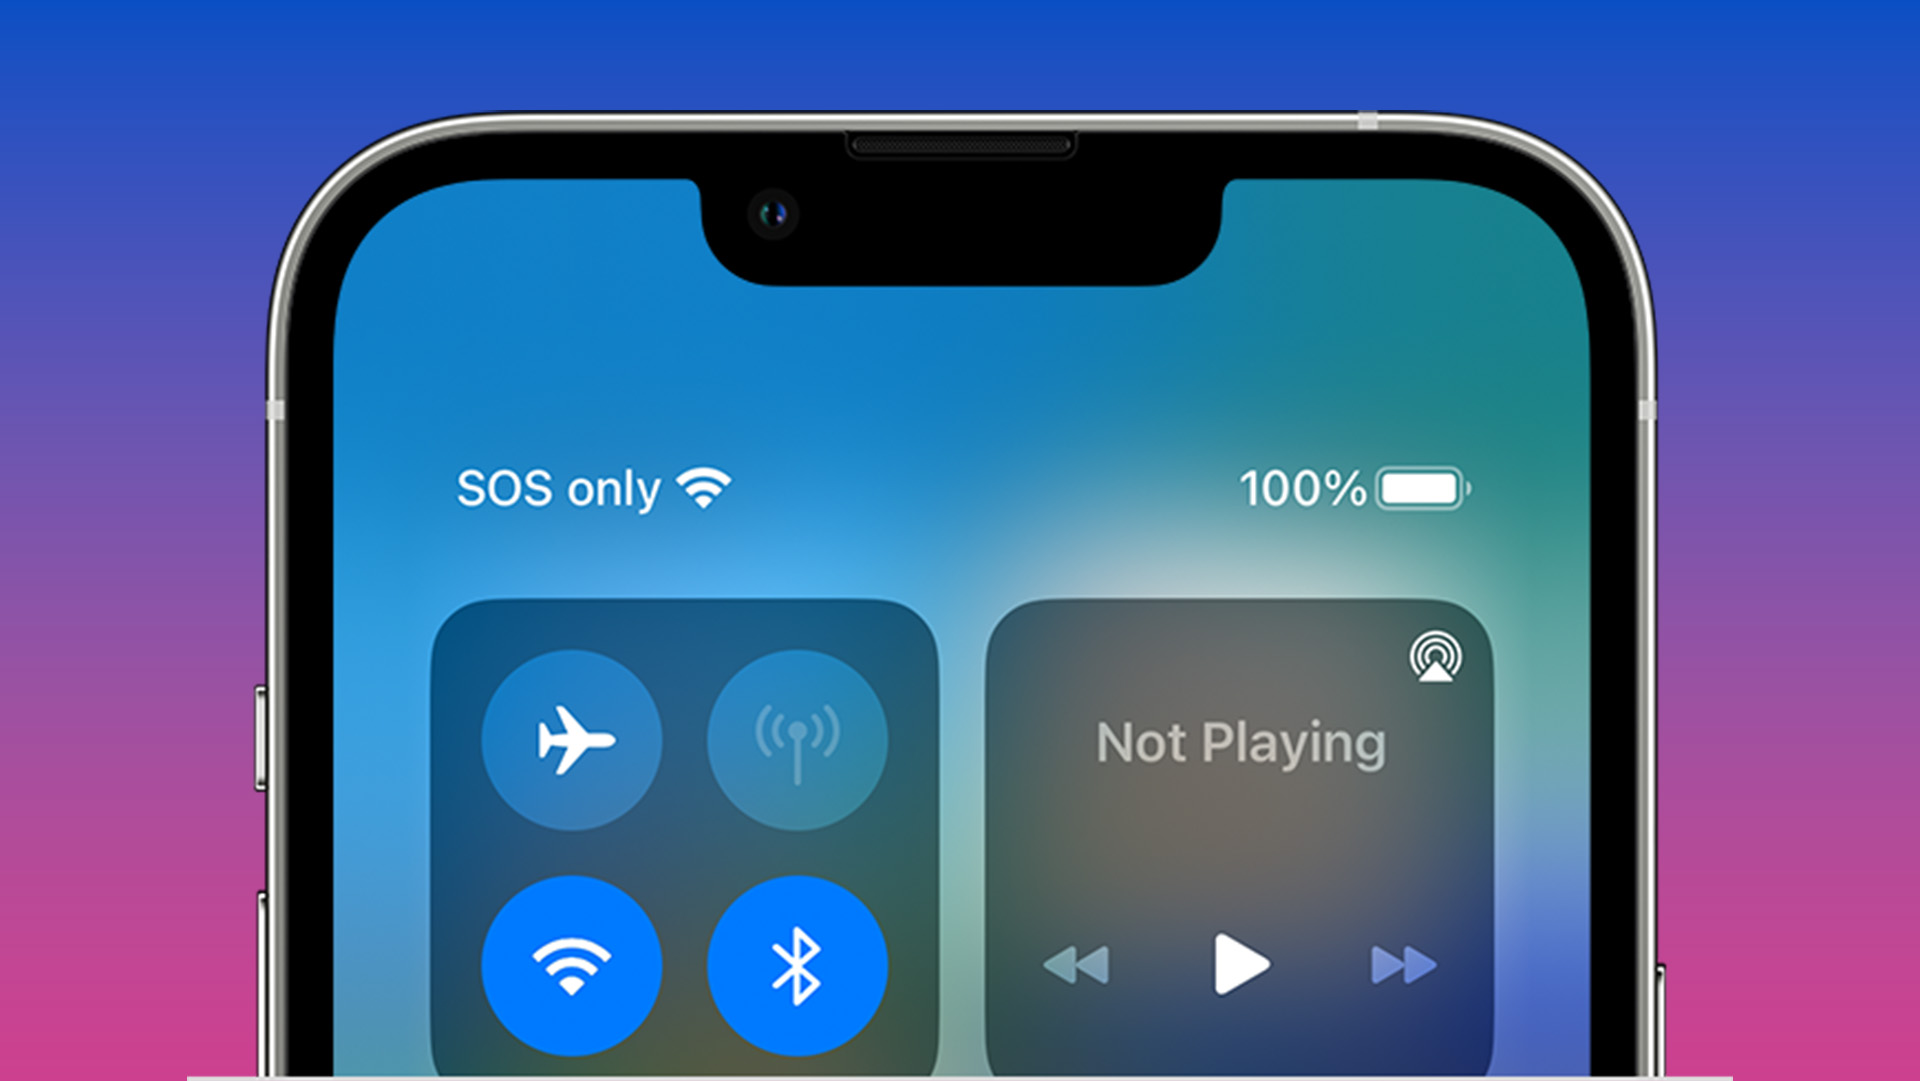 SOS Only Mean on iPhone